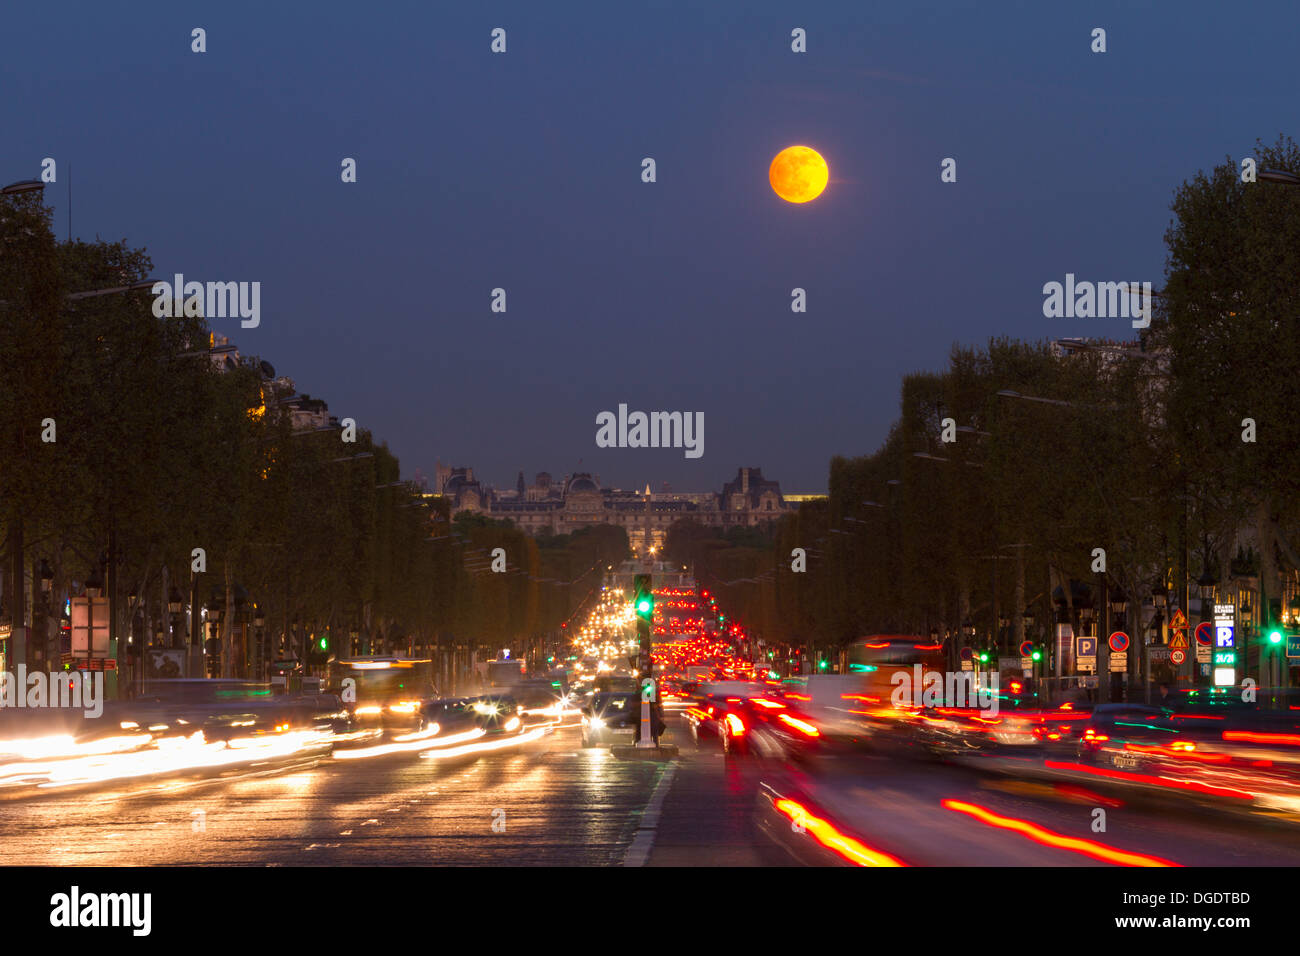 The moon rising above Avenue des Champs Elysees looking towards Louvre Paris France Stock Photo